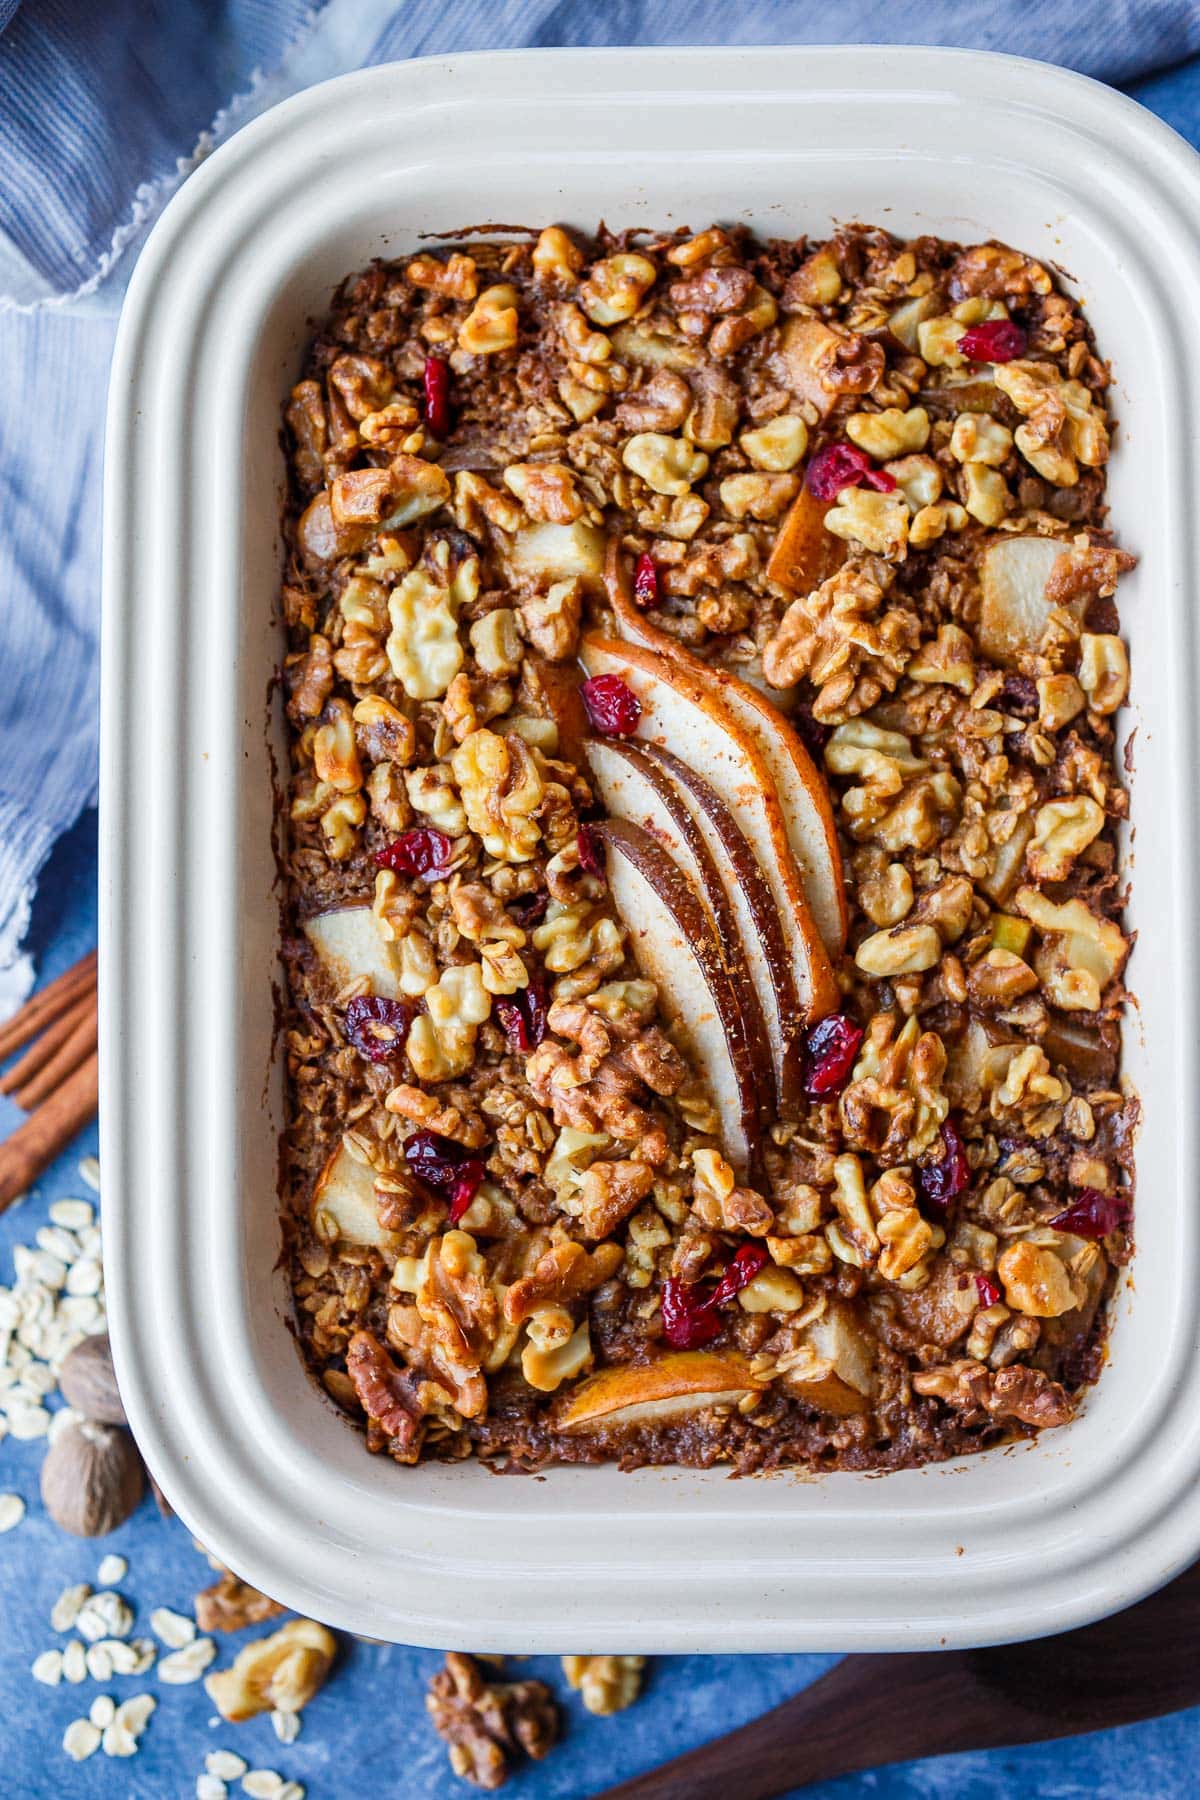 baked oatmeal in baking dish topped with walnuts, dried cranberries, and slices of pears